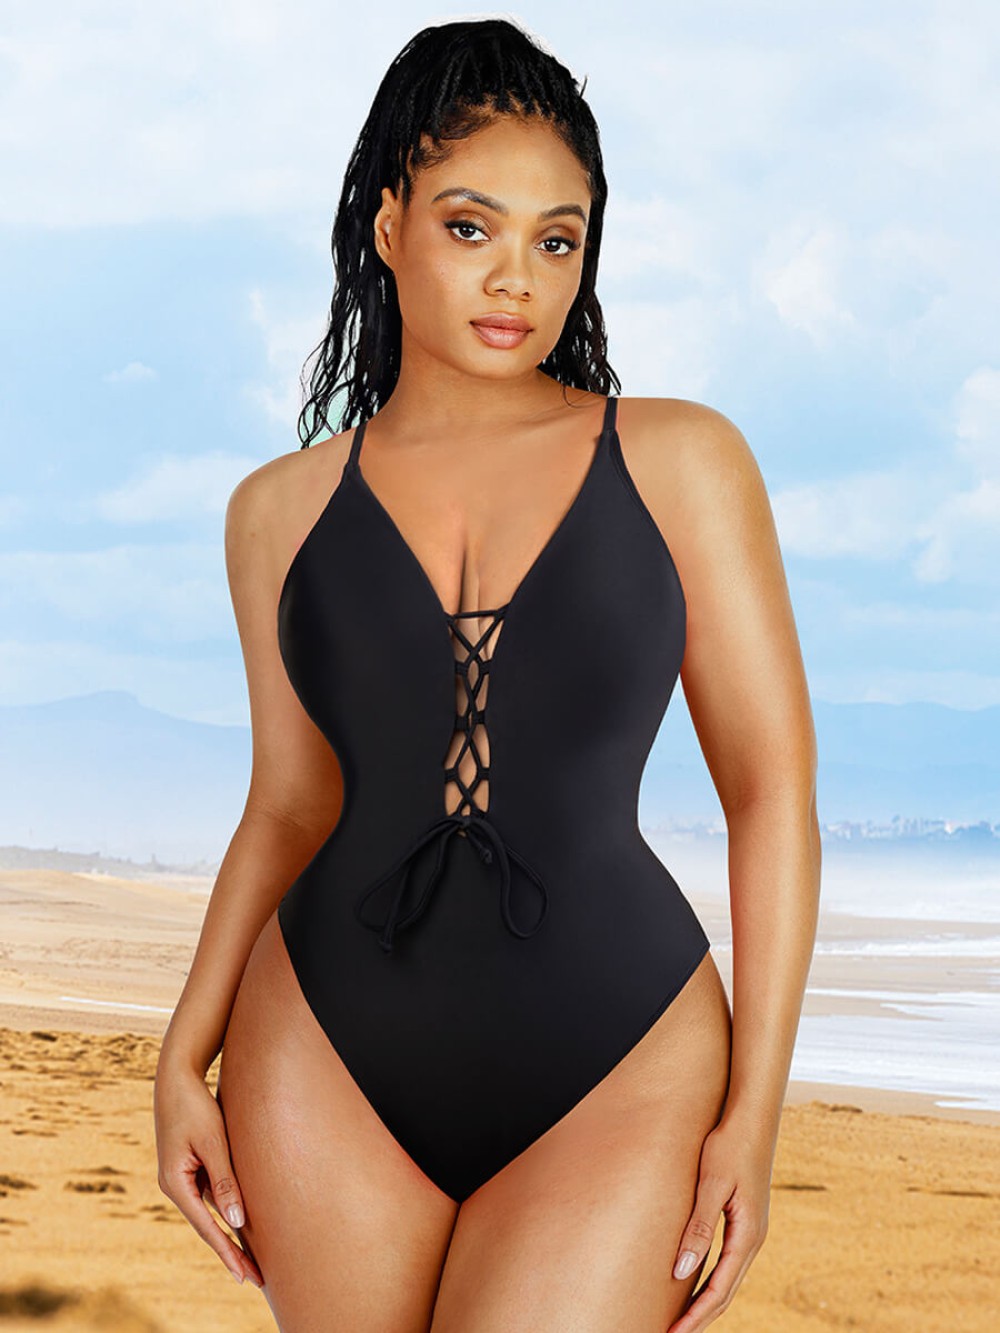 Wholesale Slimming High Waist Lace-Up One Piece Swimsuit